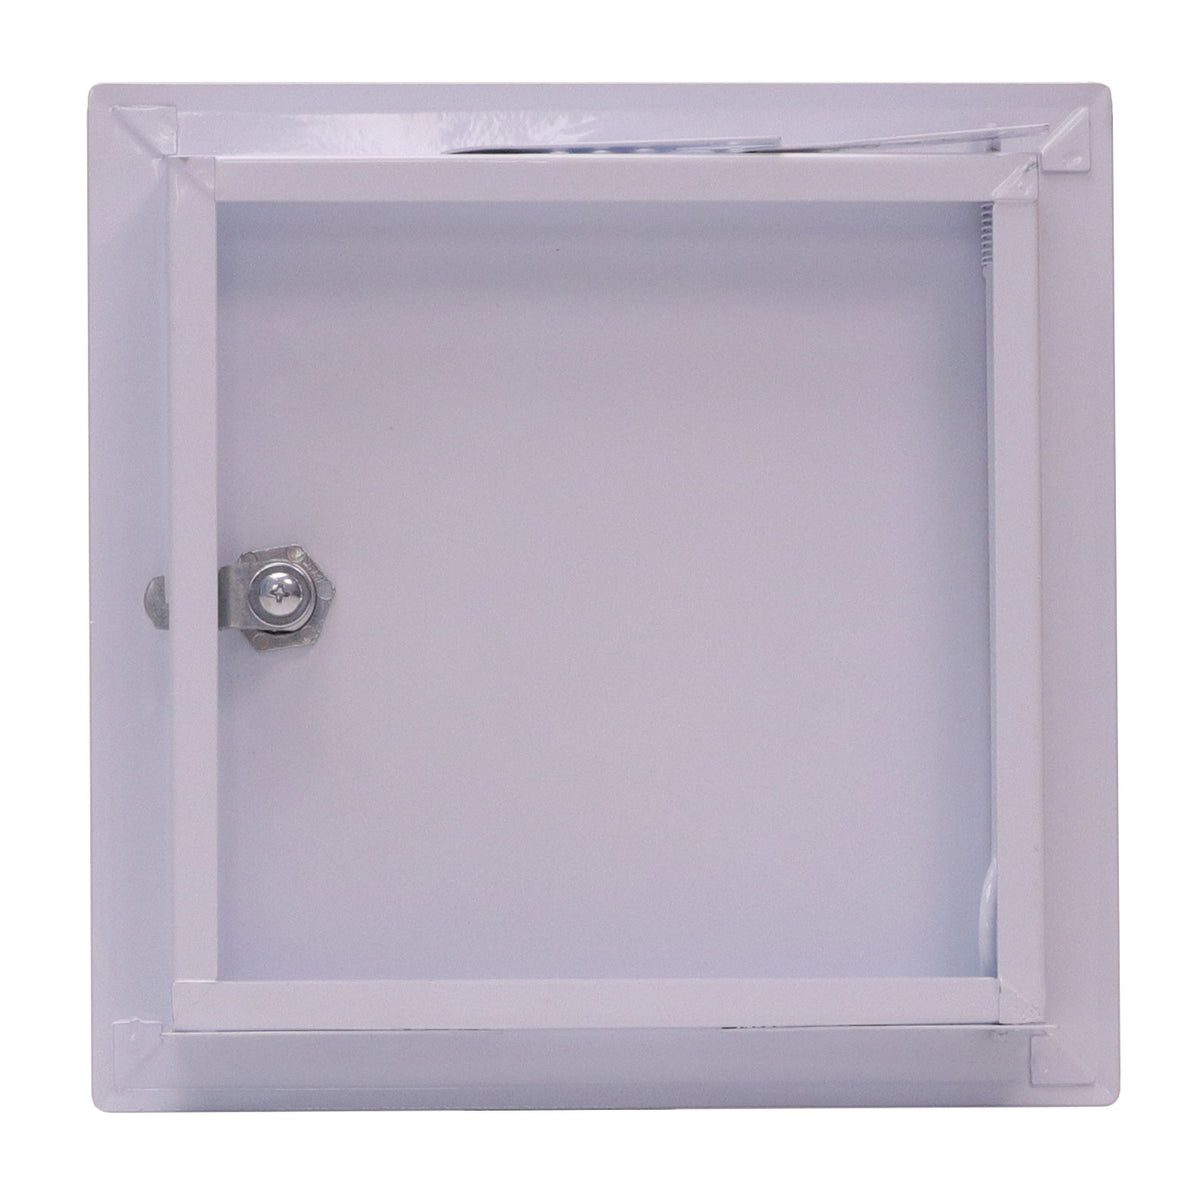 24&quot; X 24&quot; Steel Access Panel Removable Door For Wall / Ceiling Application (Lock and Key) With Frame - [Outer Dimensions: 25&quot; Width X 25&quot; Height]